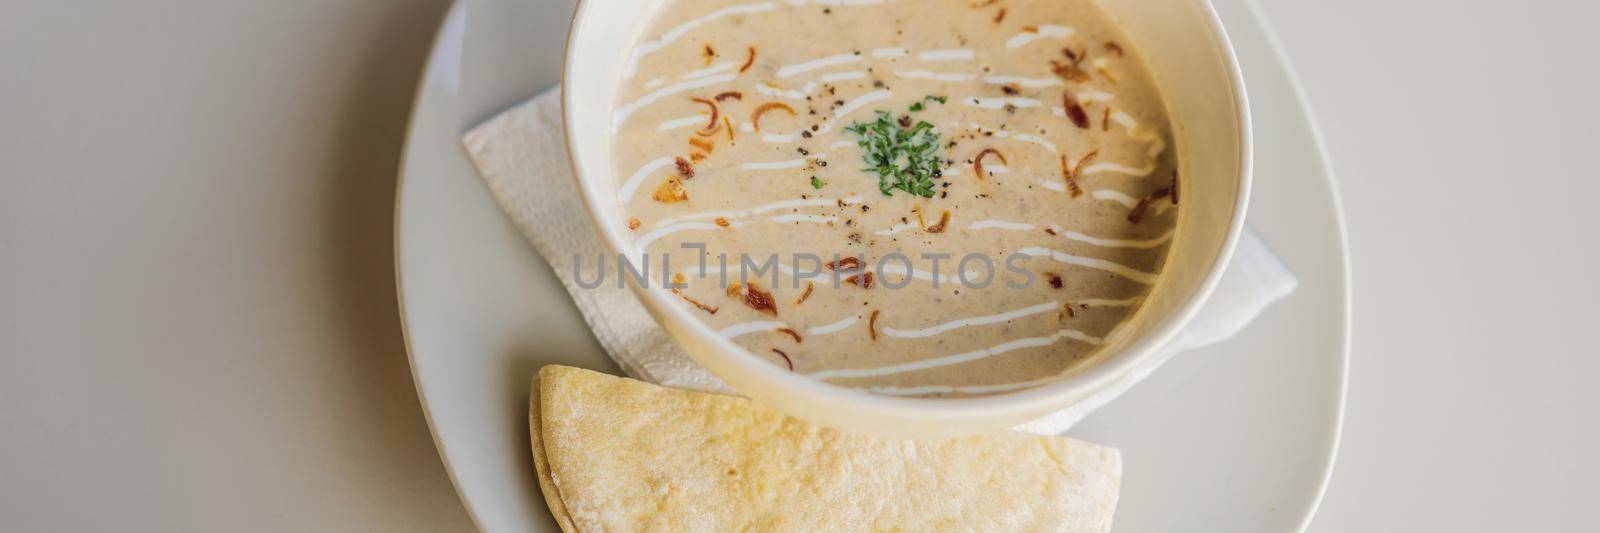 Puree soup with bread on white table. BANNER, LONG FORMAT